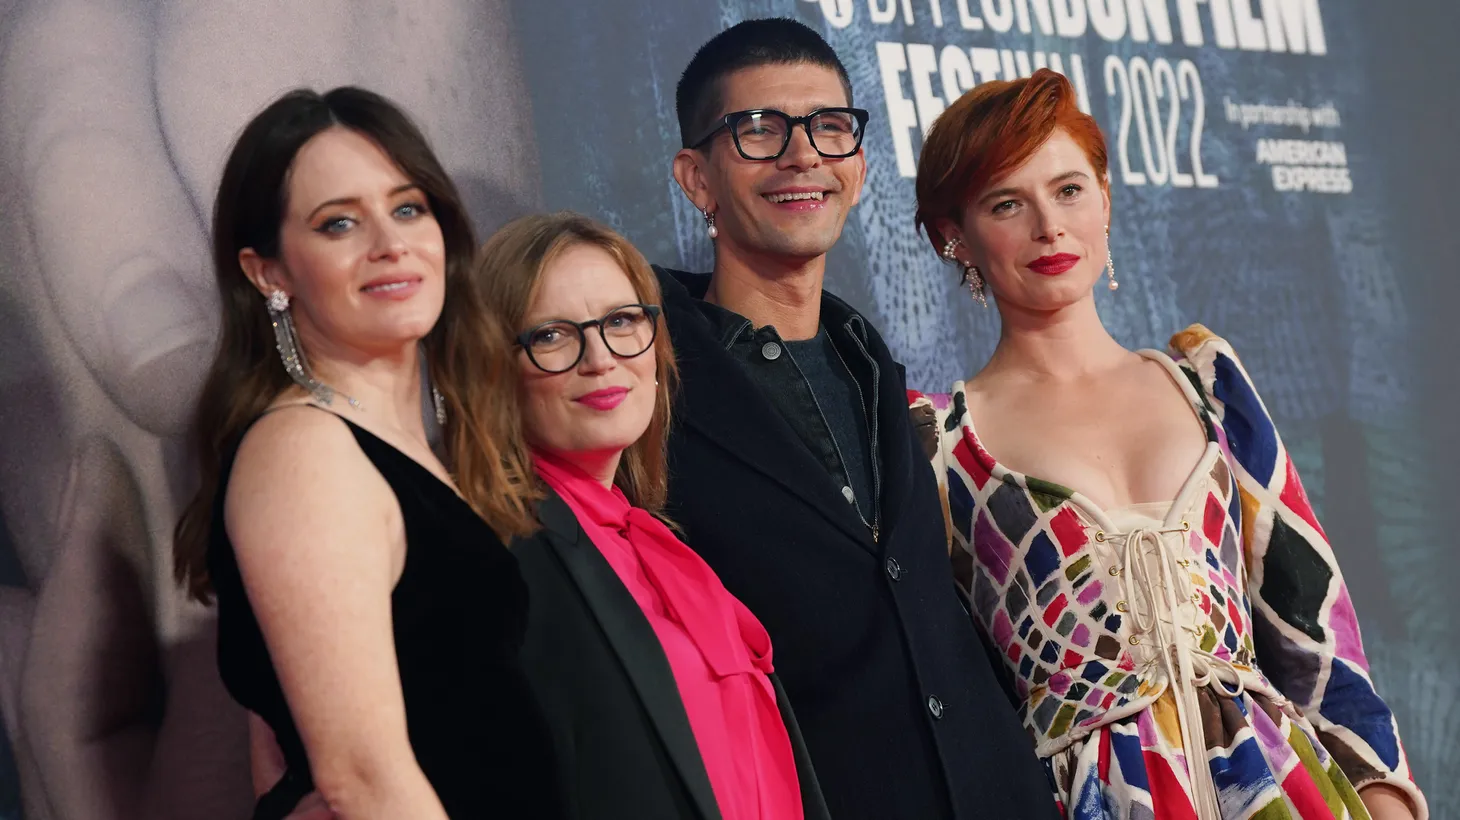 (L-R) Claire Foy, director Sarah Polley, Ben Whishaw and Jessie Buckley attend “Women Talking” during the BFI London Film Festival at the Royal Festival Hall, in London on October 12, 2022.